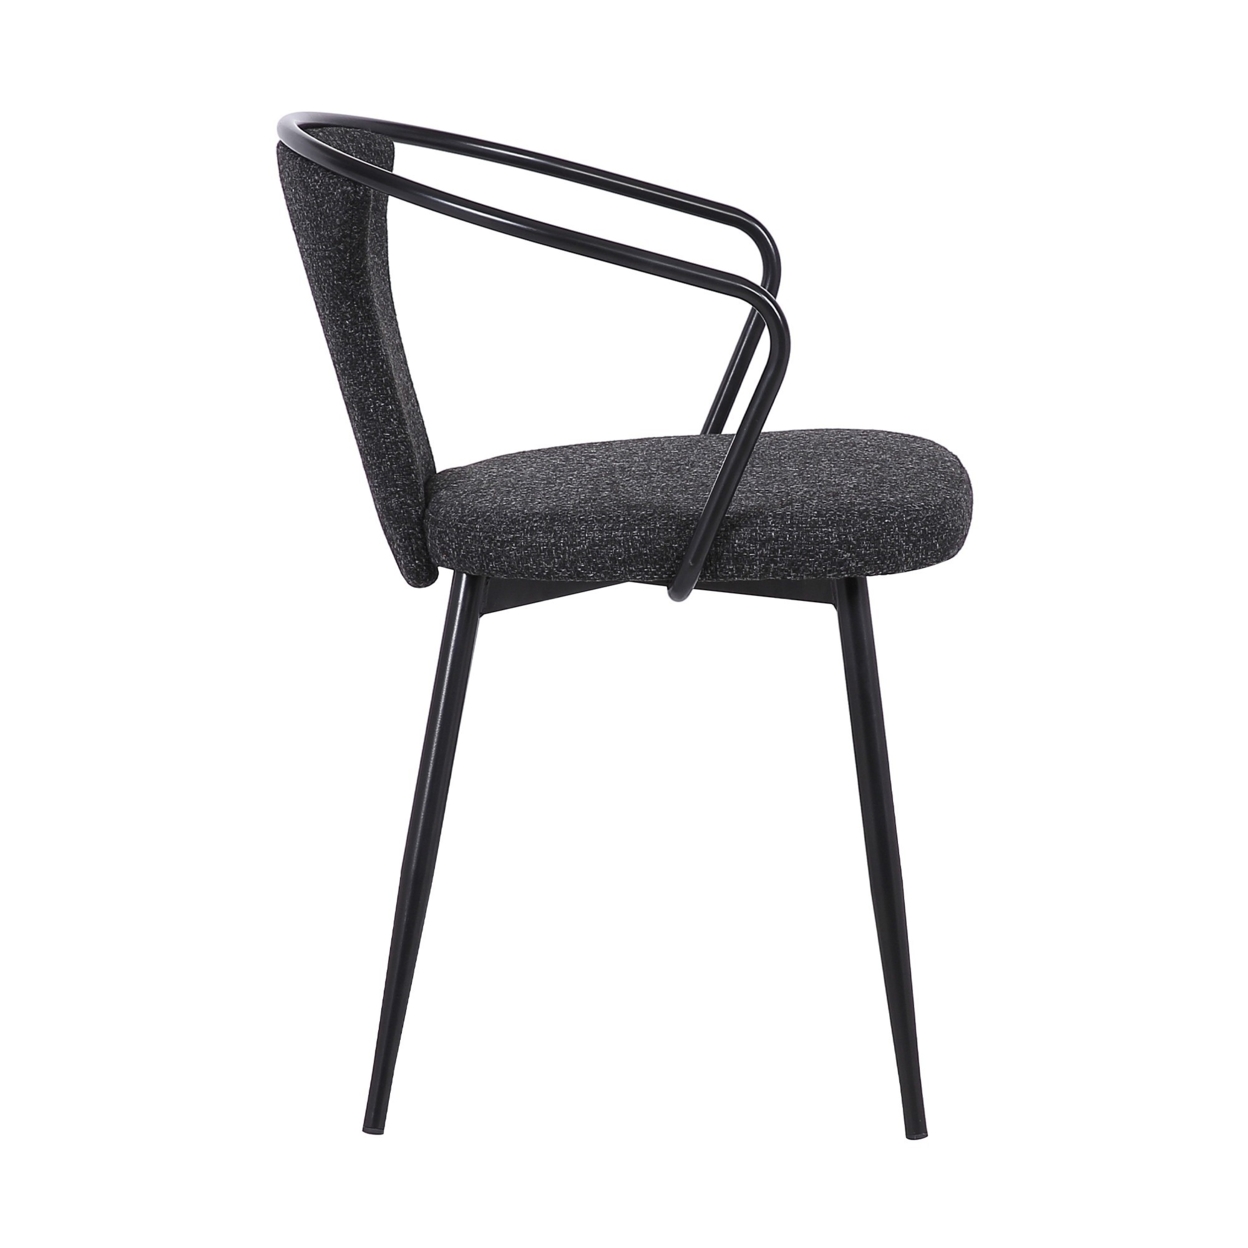 19 Inch Modern Fabric Dining Chair With Curved Back, Black- Saltoro Sherpi